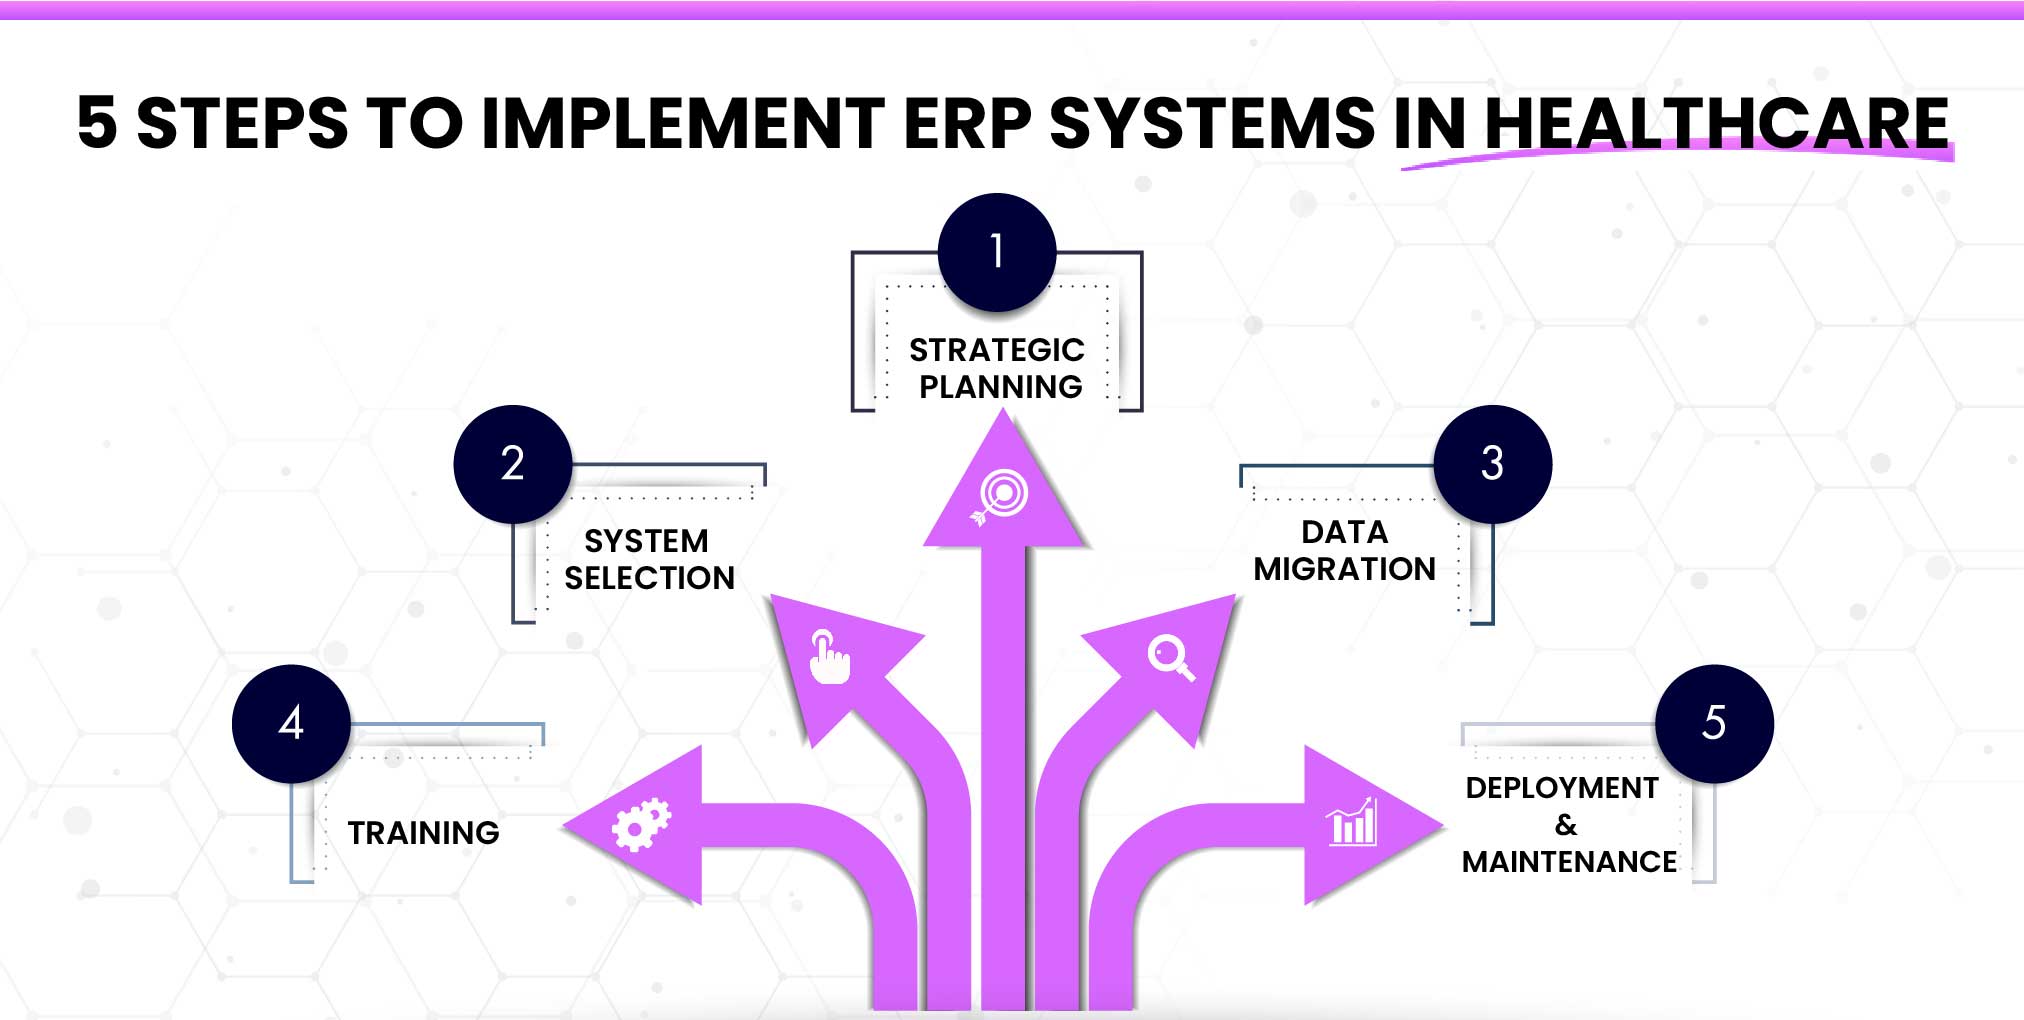 5 Steps to Implement ERP Systems in Healthcare